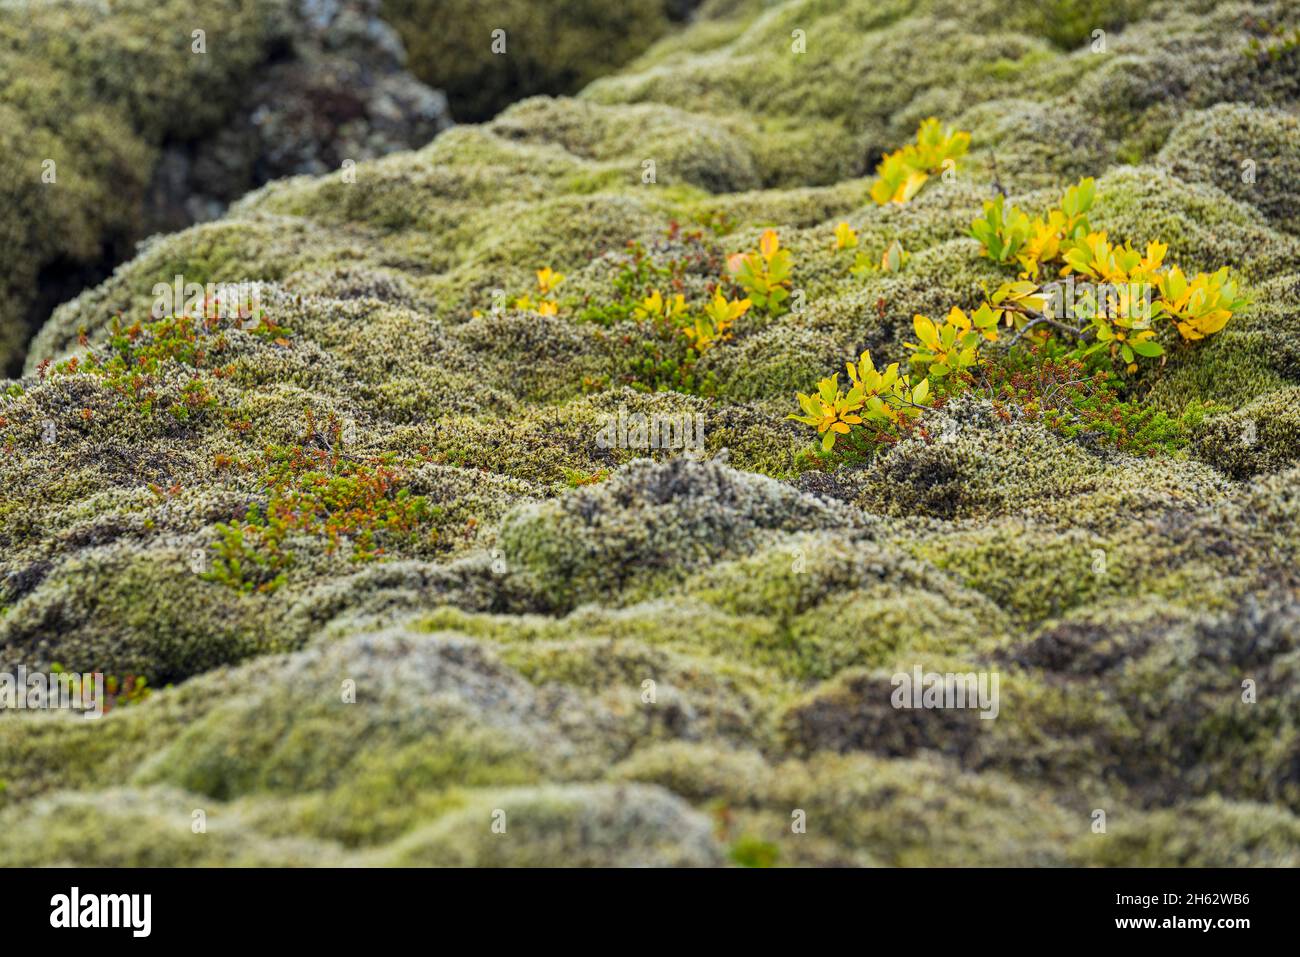 cushions of moss cover the lava rock on the reykjanes peninsula,in between the leaves of a small shrub turn yellow,iceland,southwest iceland Stock Photo